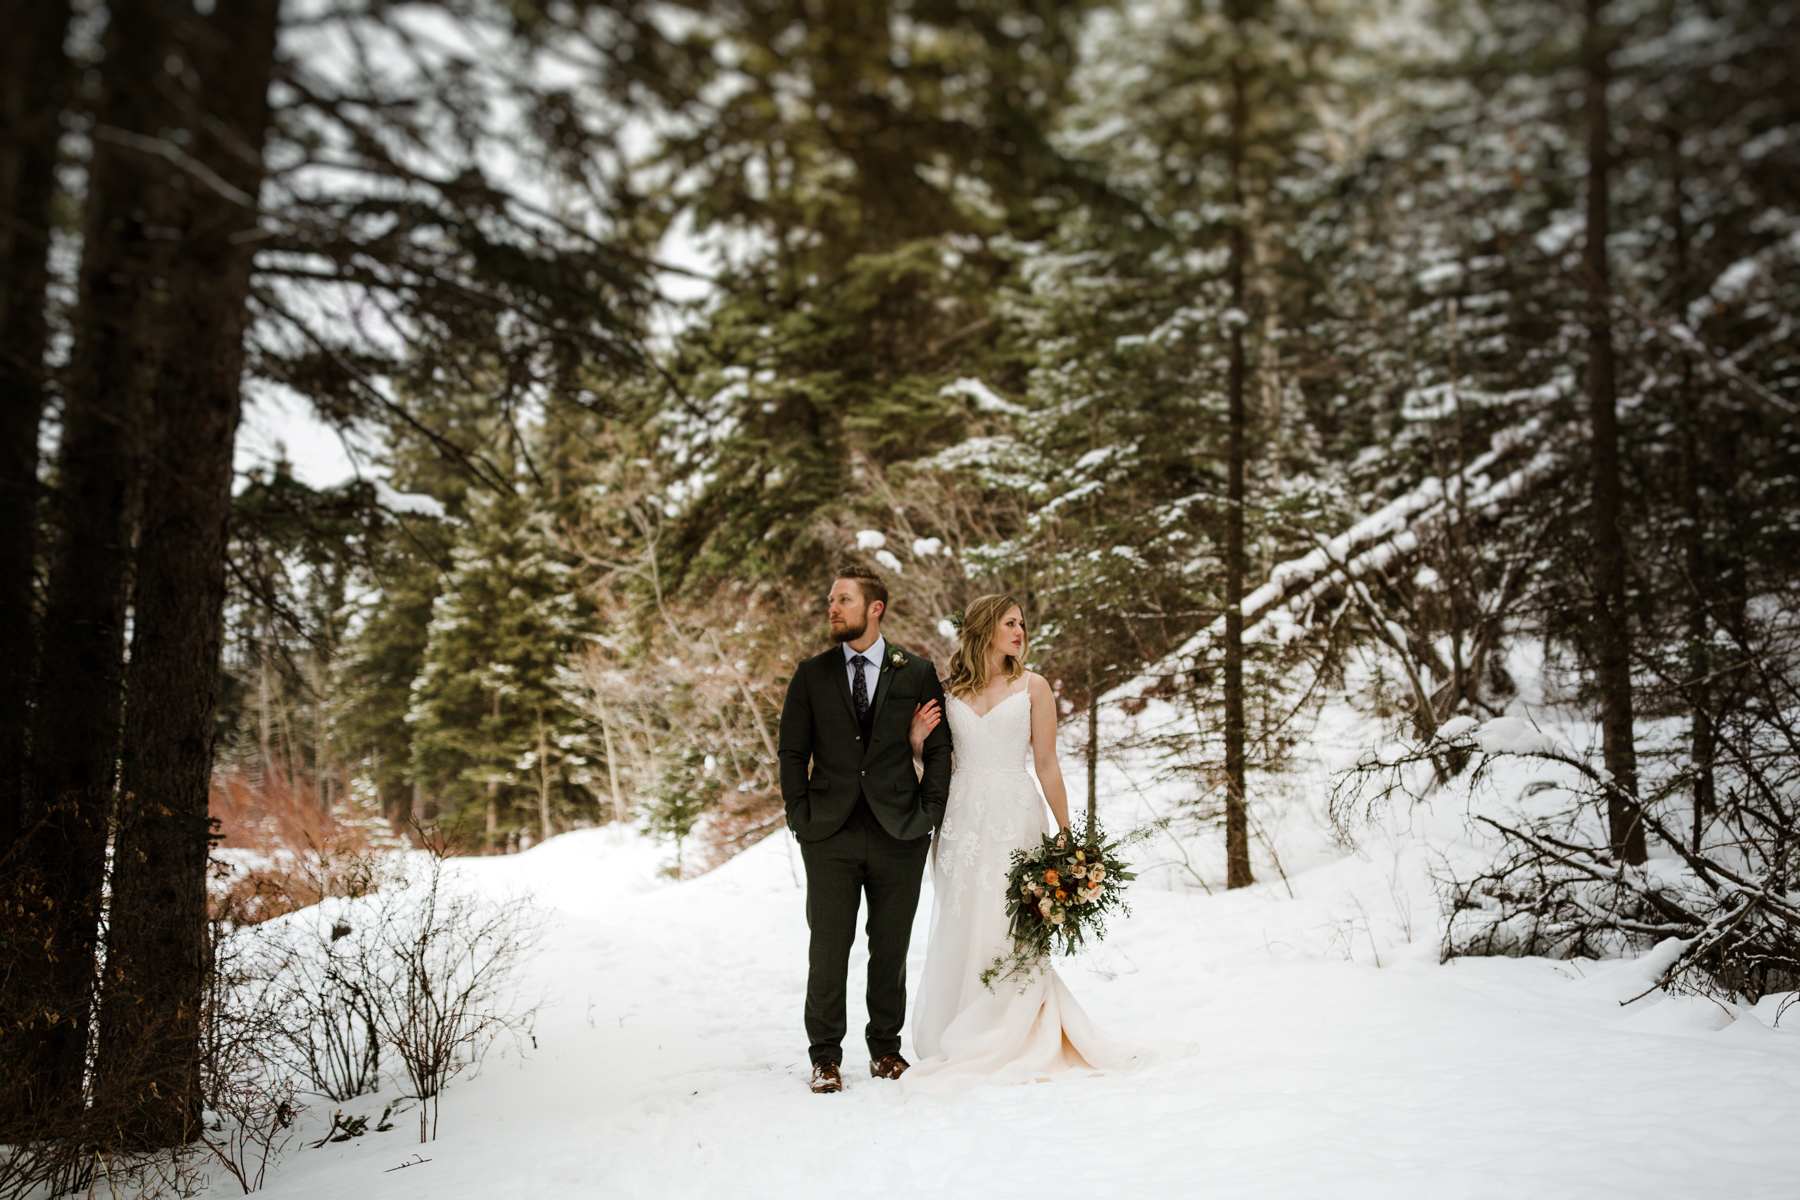 Canmore Elopement Photographer in the Canadian Rockies - Image 39